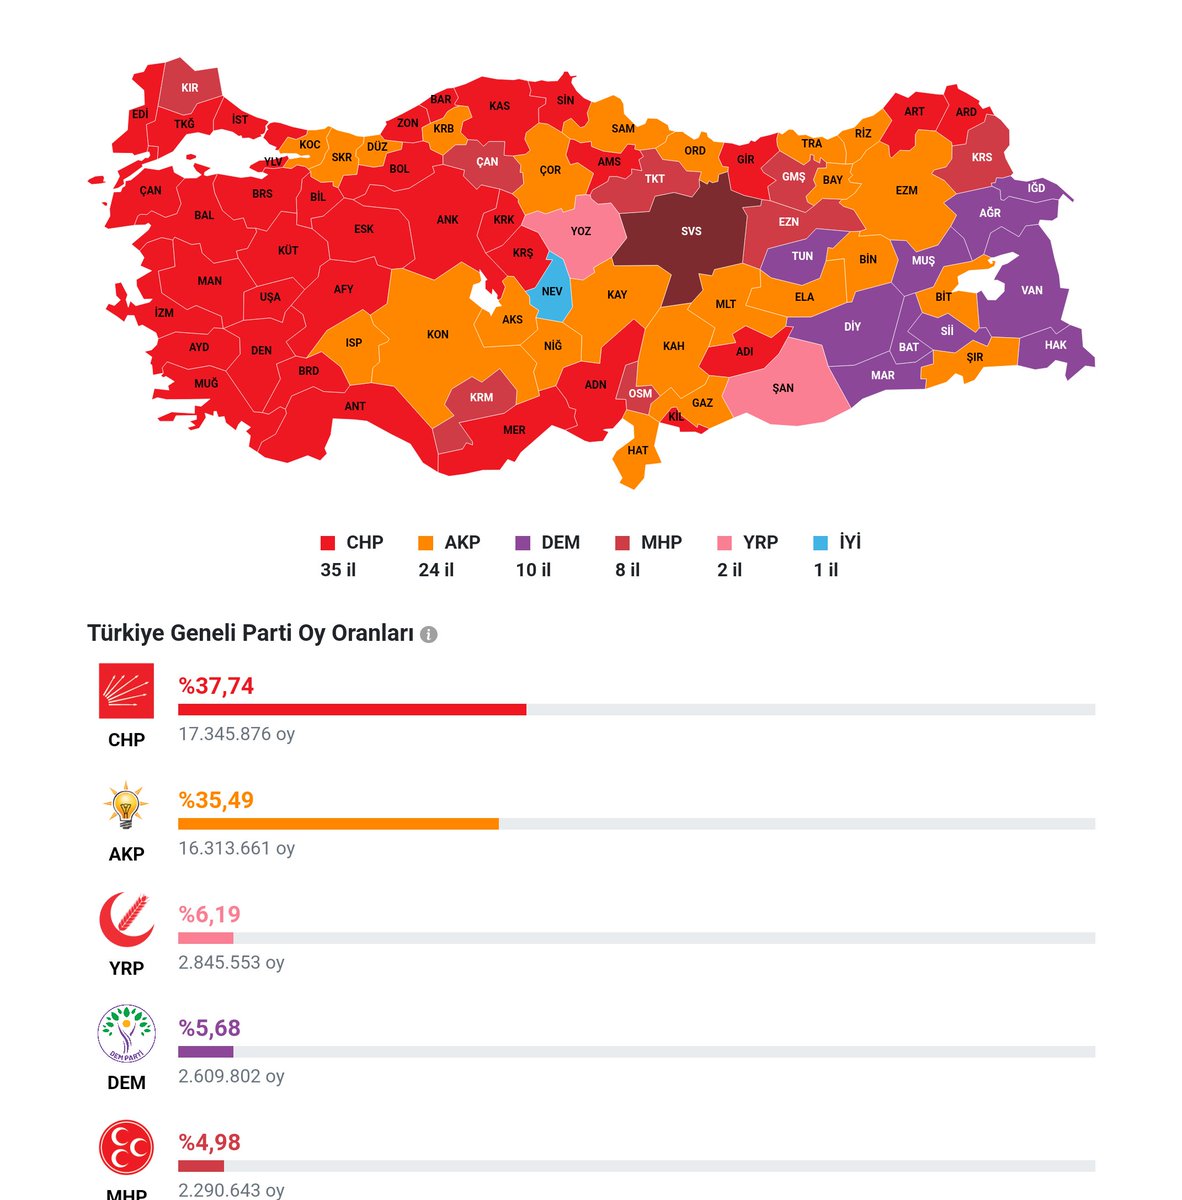 Ruling AKP suffers historic defeat in #TurkeyElections (local). 🇹🇷 Opposition CHP now #1 party, dominates electoral map. Thumping majority in Istanbul & Ankara. Won back my home city of Bursa + others. All despite allied parties deserting them. Also, YRP new force on right.